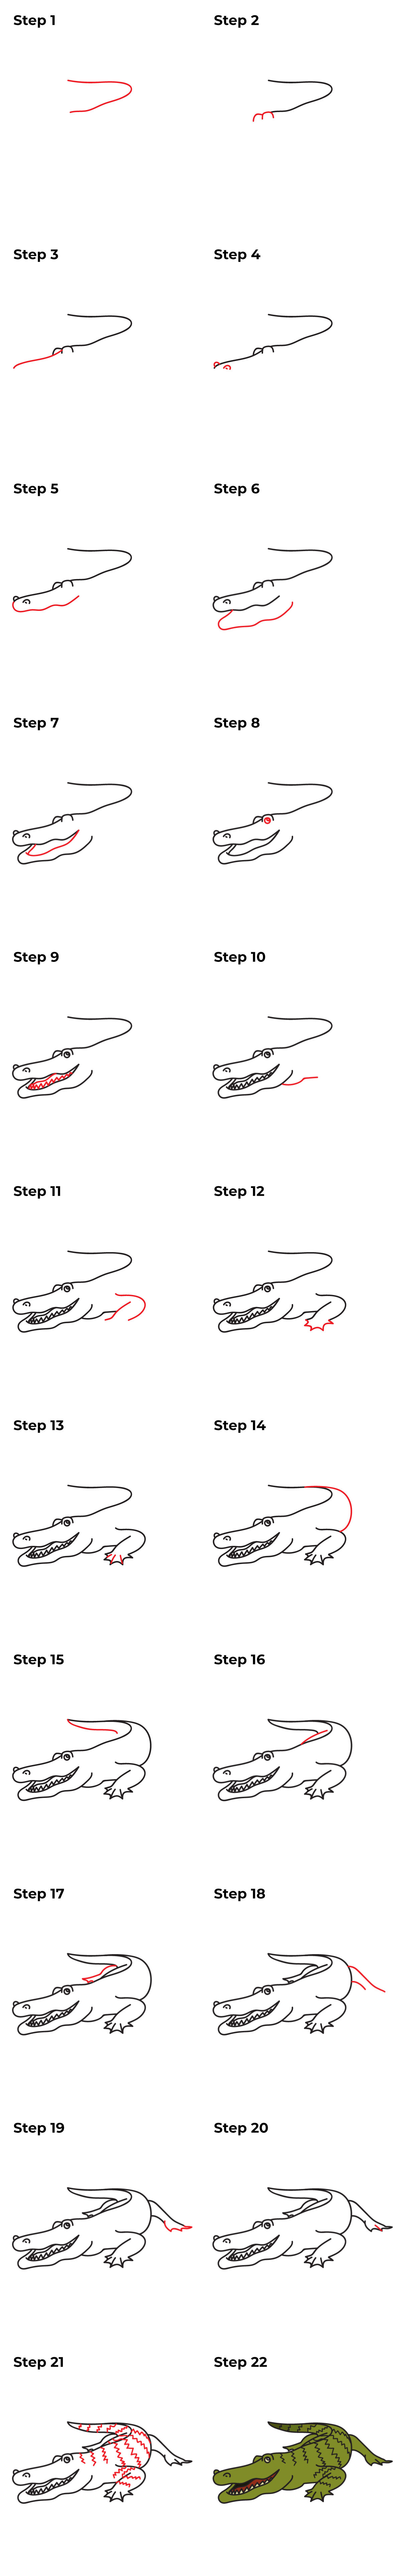 How to Draw an Alligator - Printable Tutorial